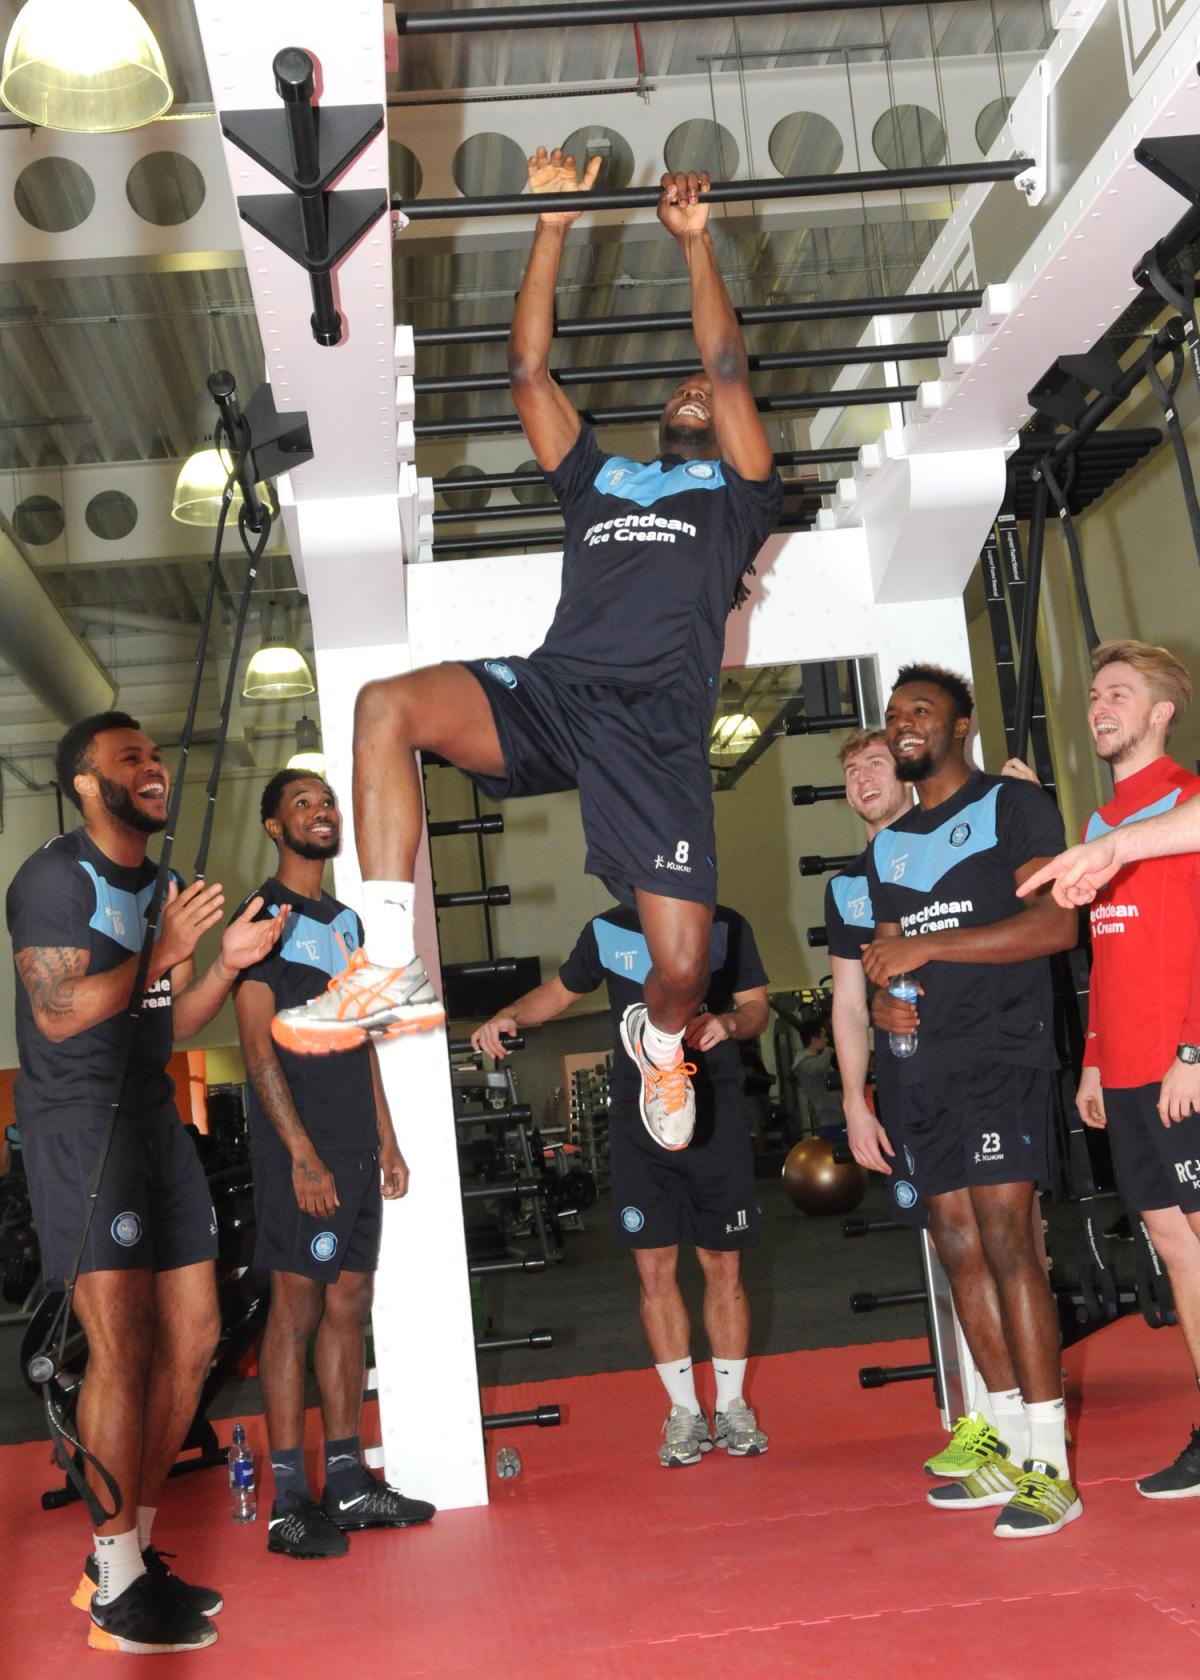 Wycombe Wanderers train at the newly opened Wycombe Leisure Centre - ARM Images